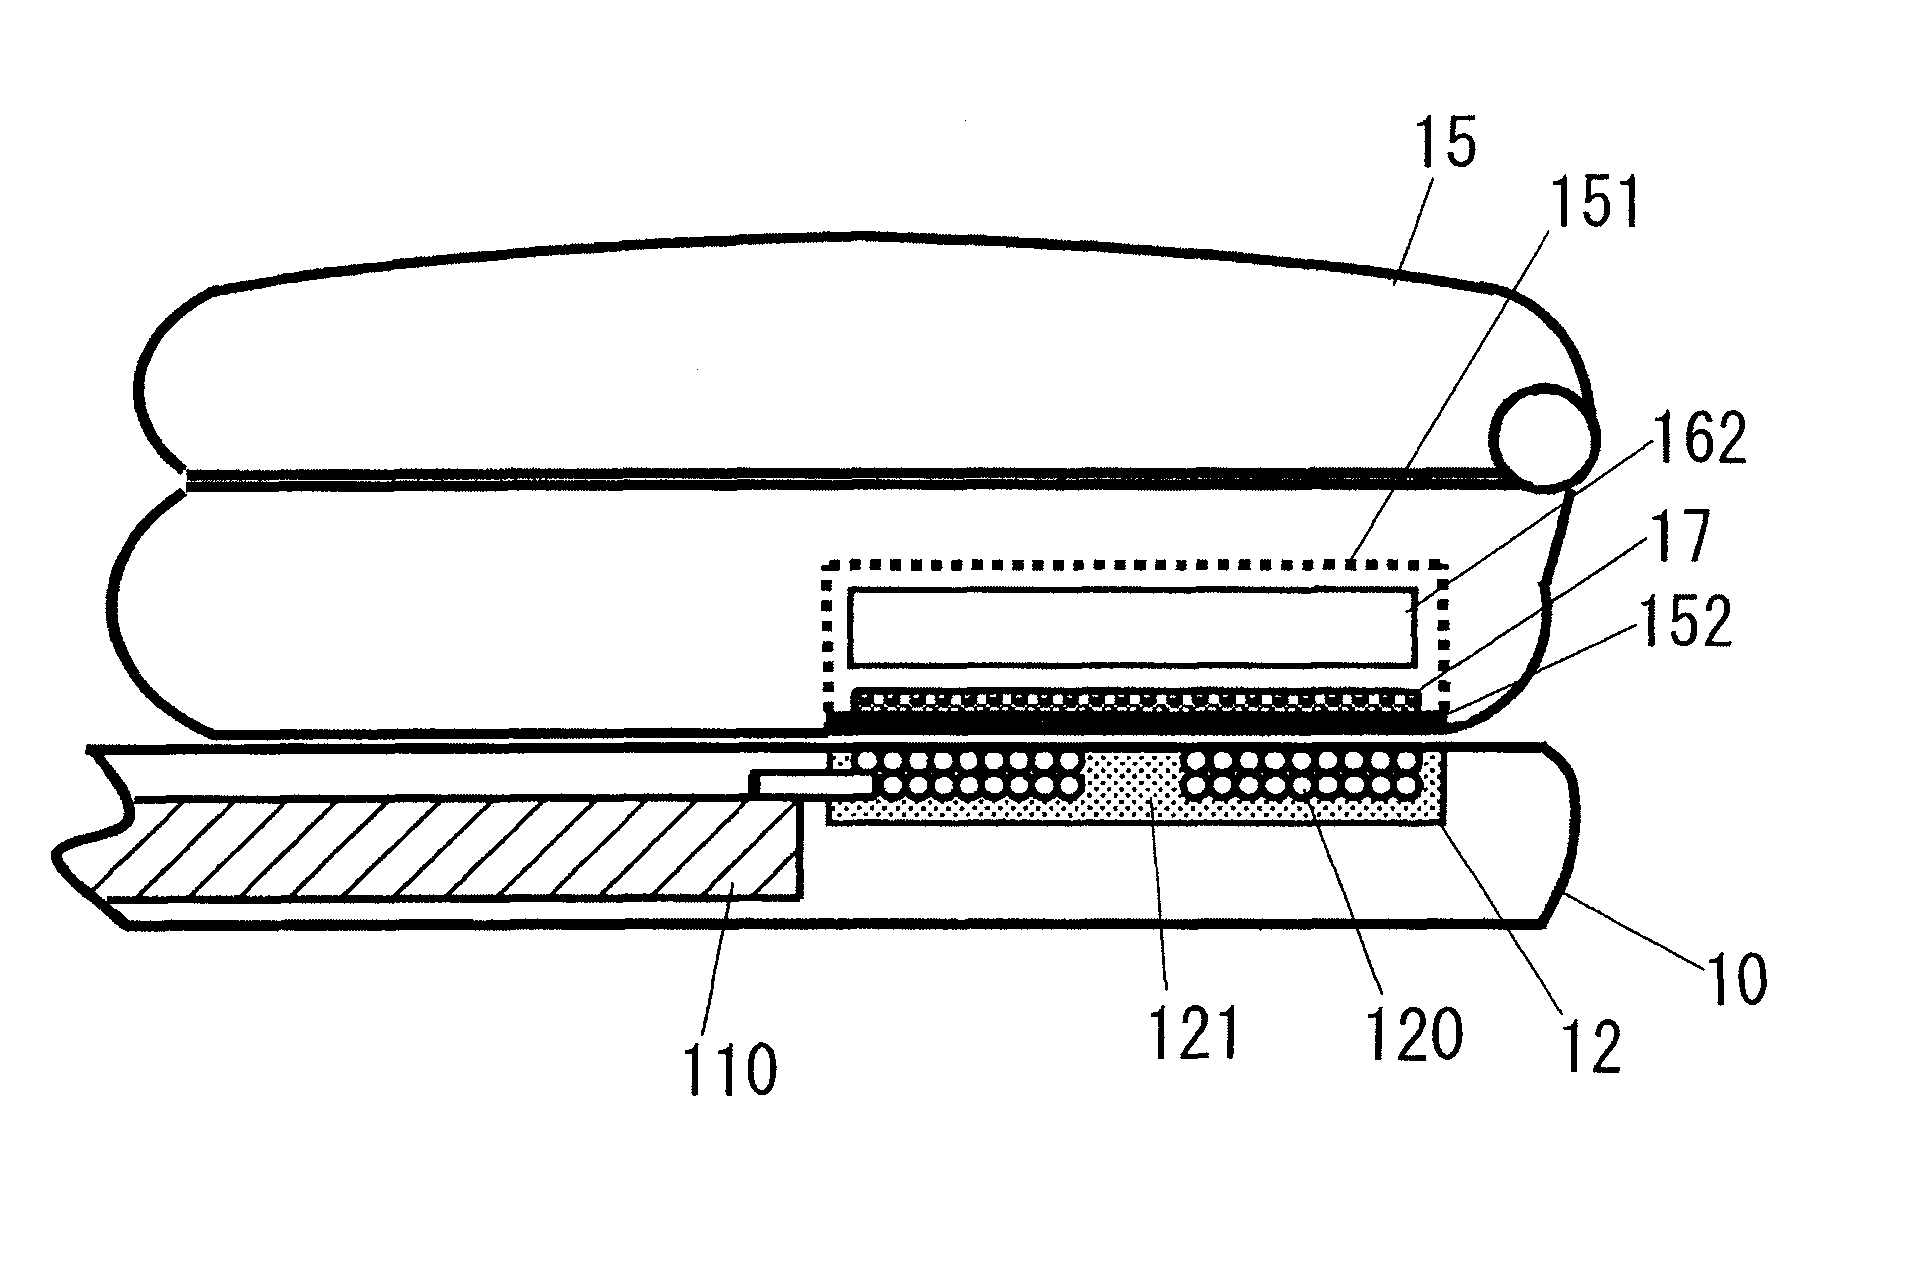 Contactless power transmission apparatus and a method of manufacturing a secondary side thereof